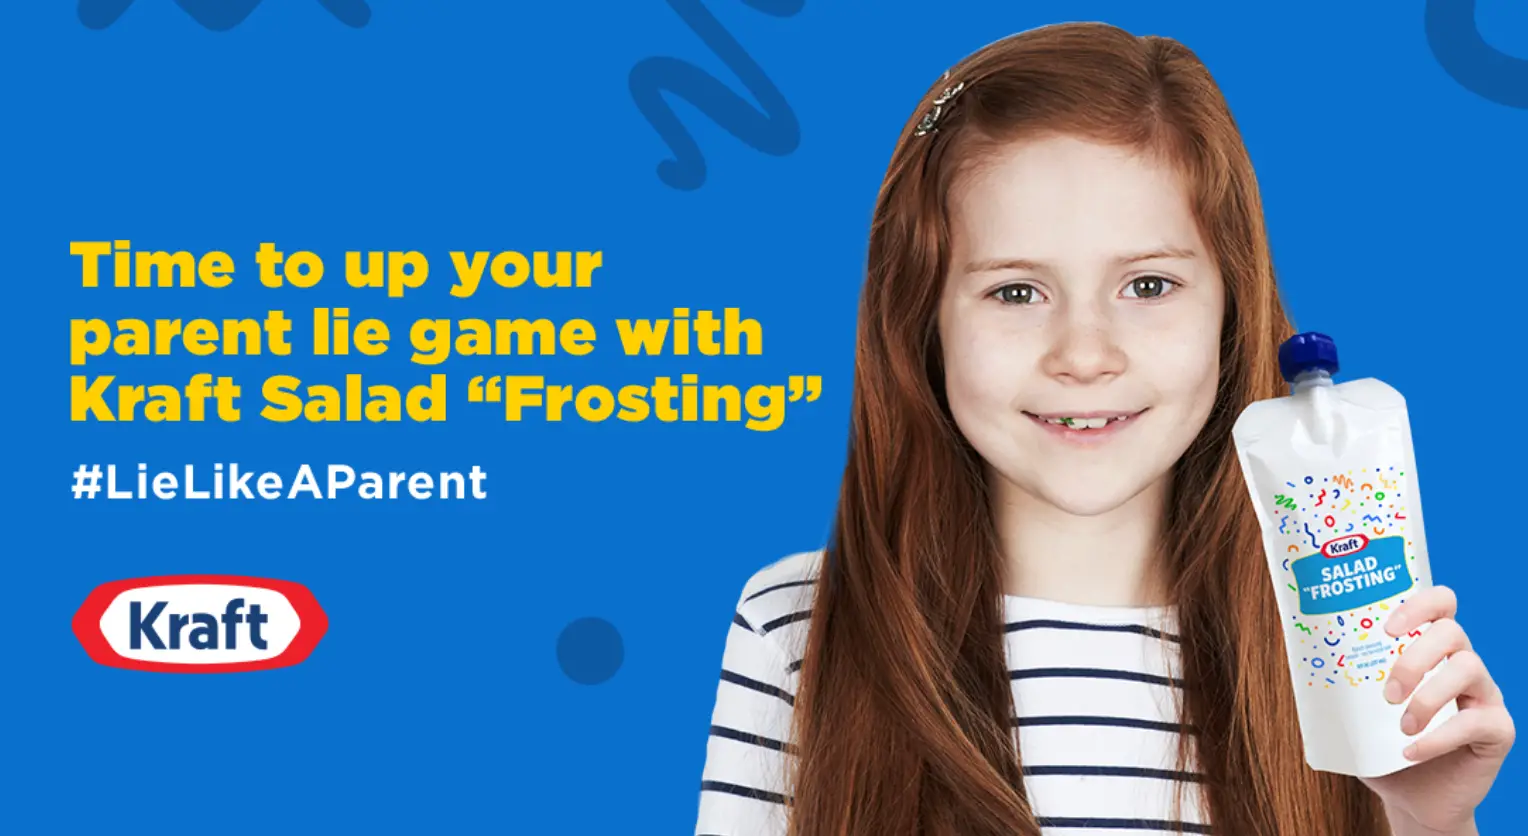 Enter the Kraft Lie Like A Parent Contest for your chance to win a bottle of the New Kraft Salad Frosting. 1,500 Winners will be chosen to try out the new product